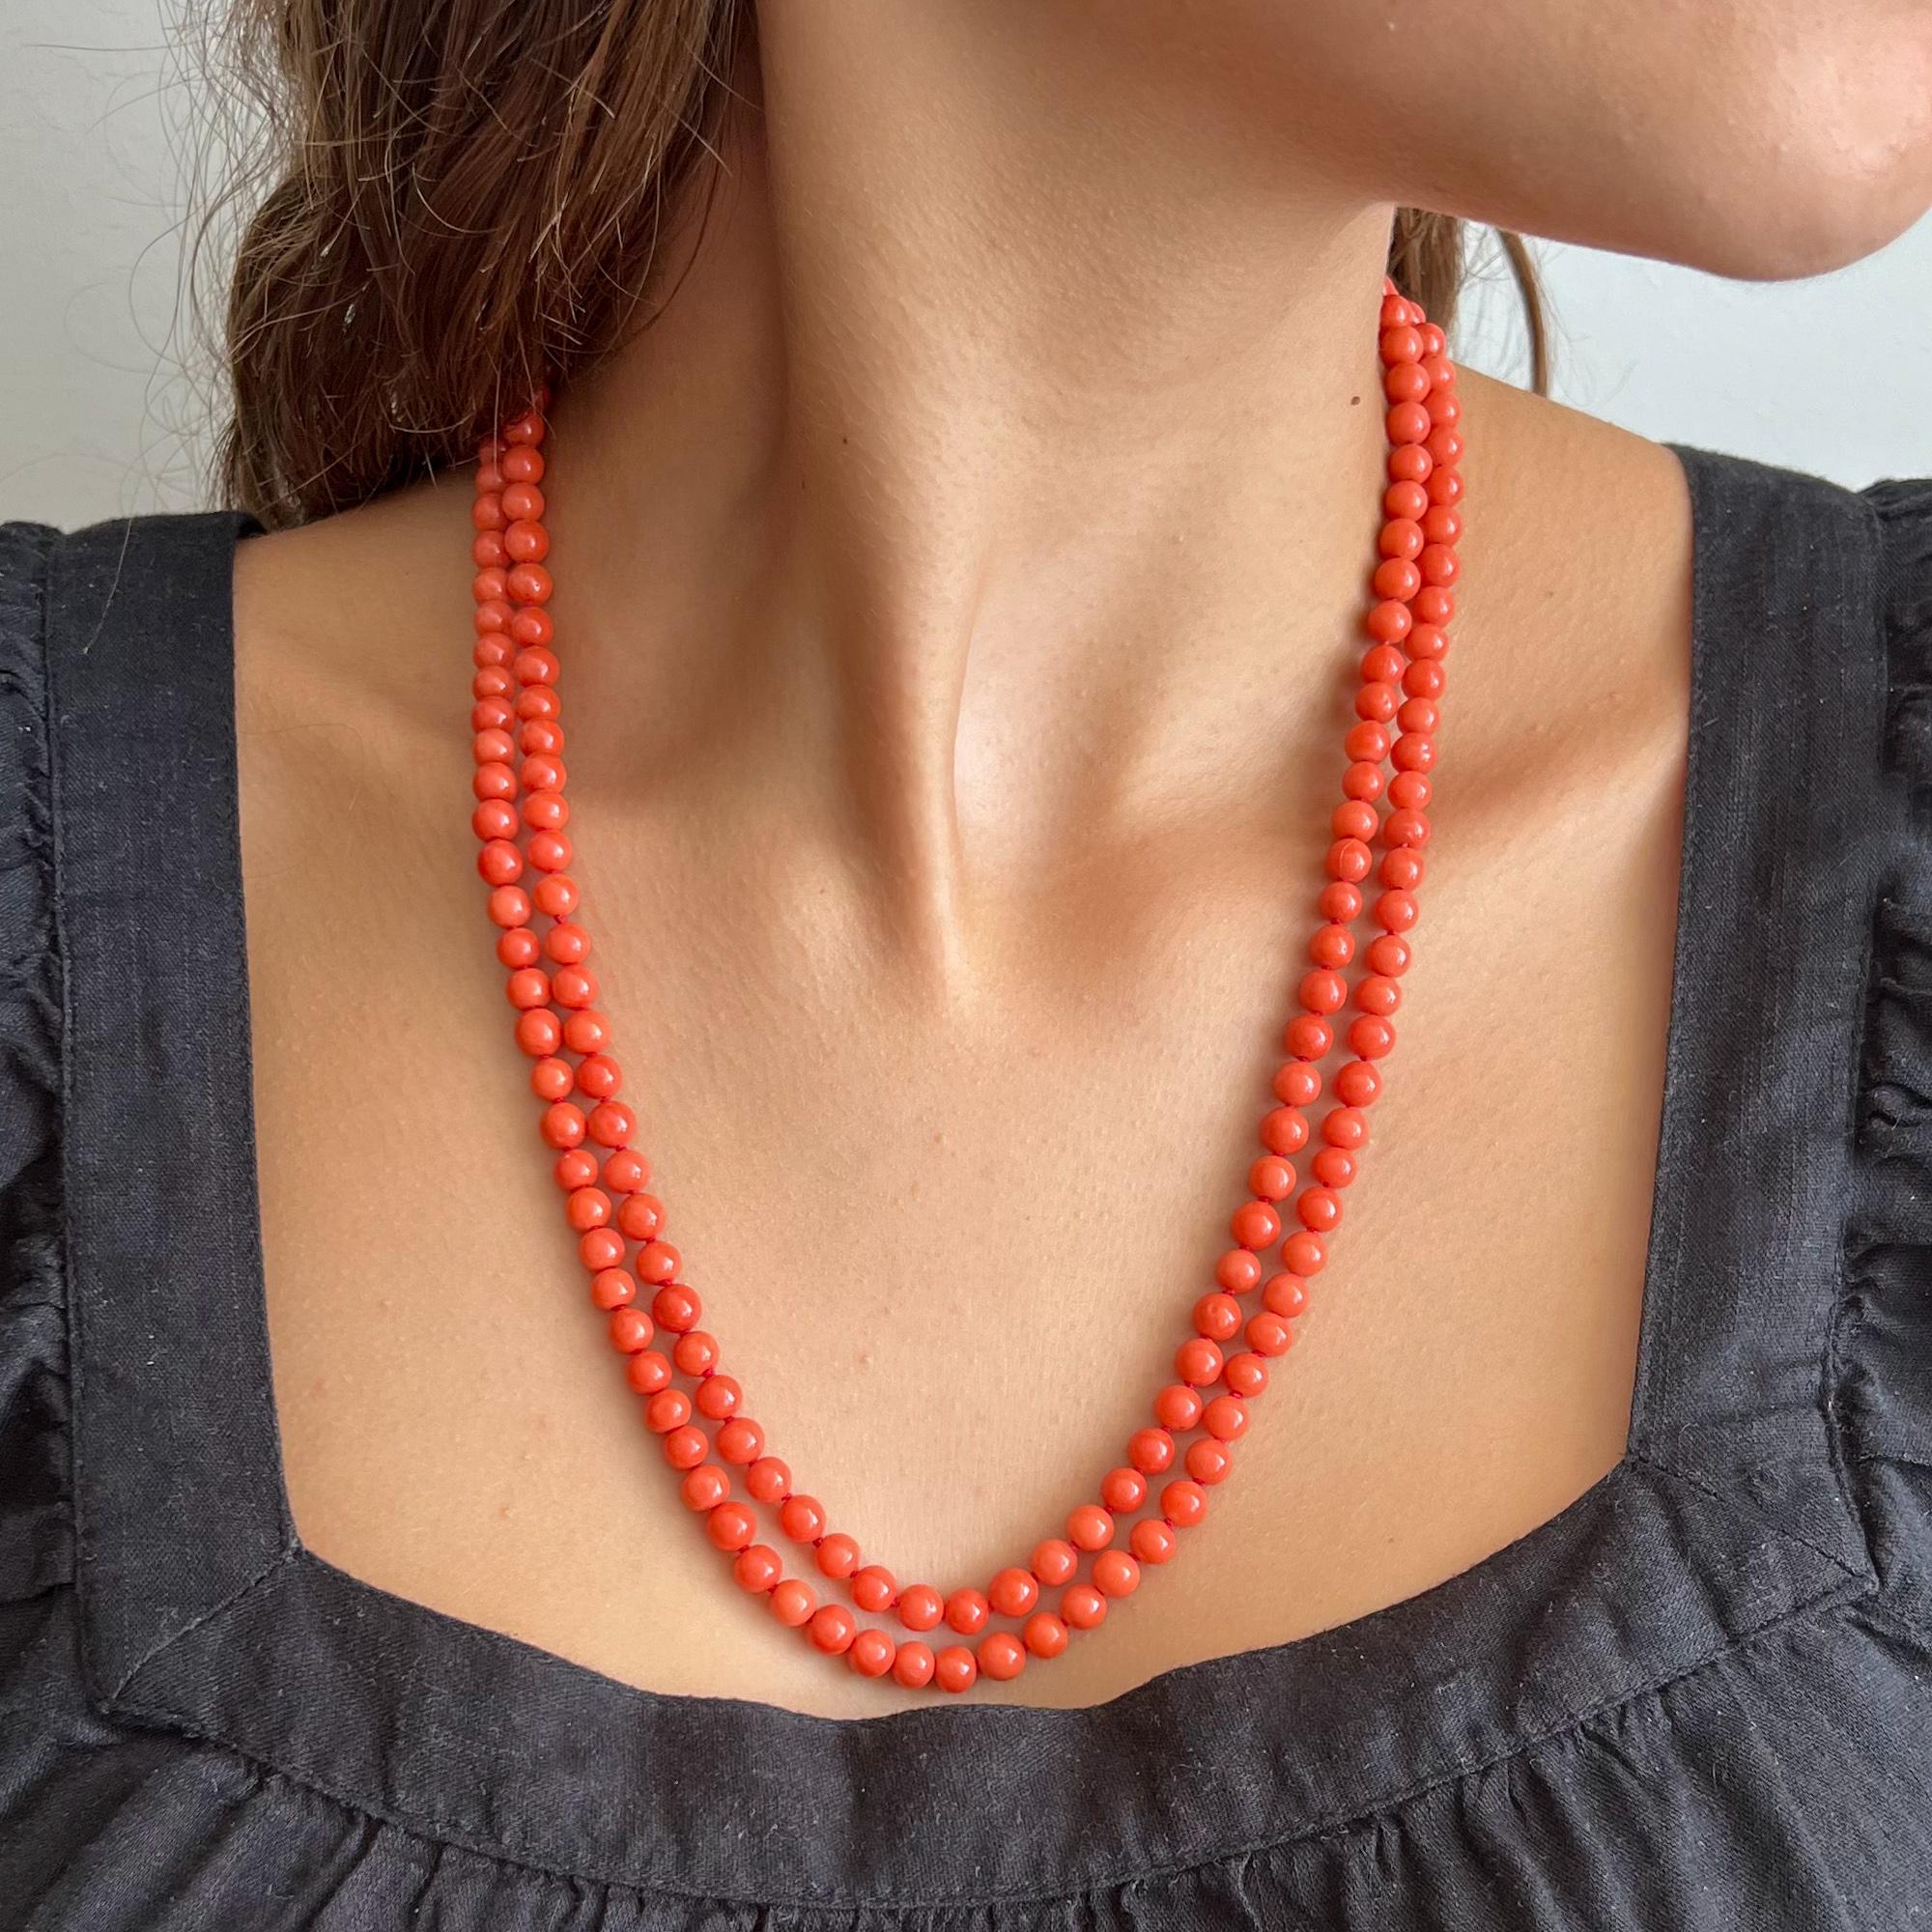 A vintage natural coral and 14 karat gold two-strand beaded necklace. The coral beads of this necklace are round-shaped and set with a beautiful oval-shaped clasp created in 14 karat gold. The color hue of the coral tends to salmon - this applies to